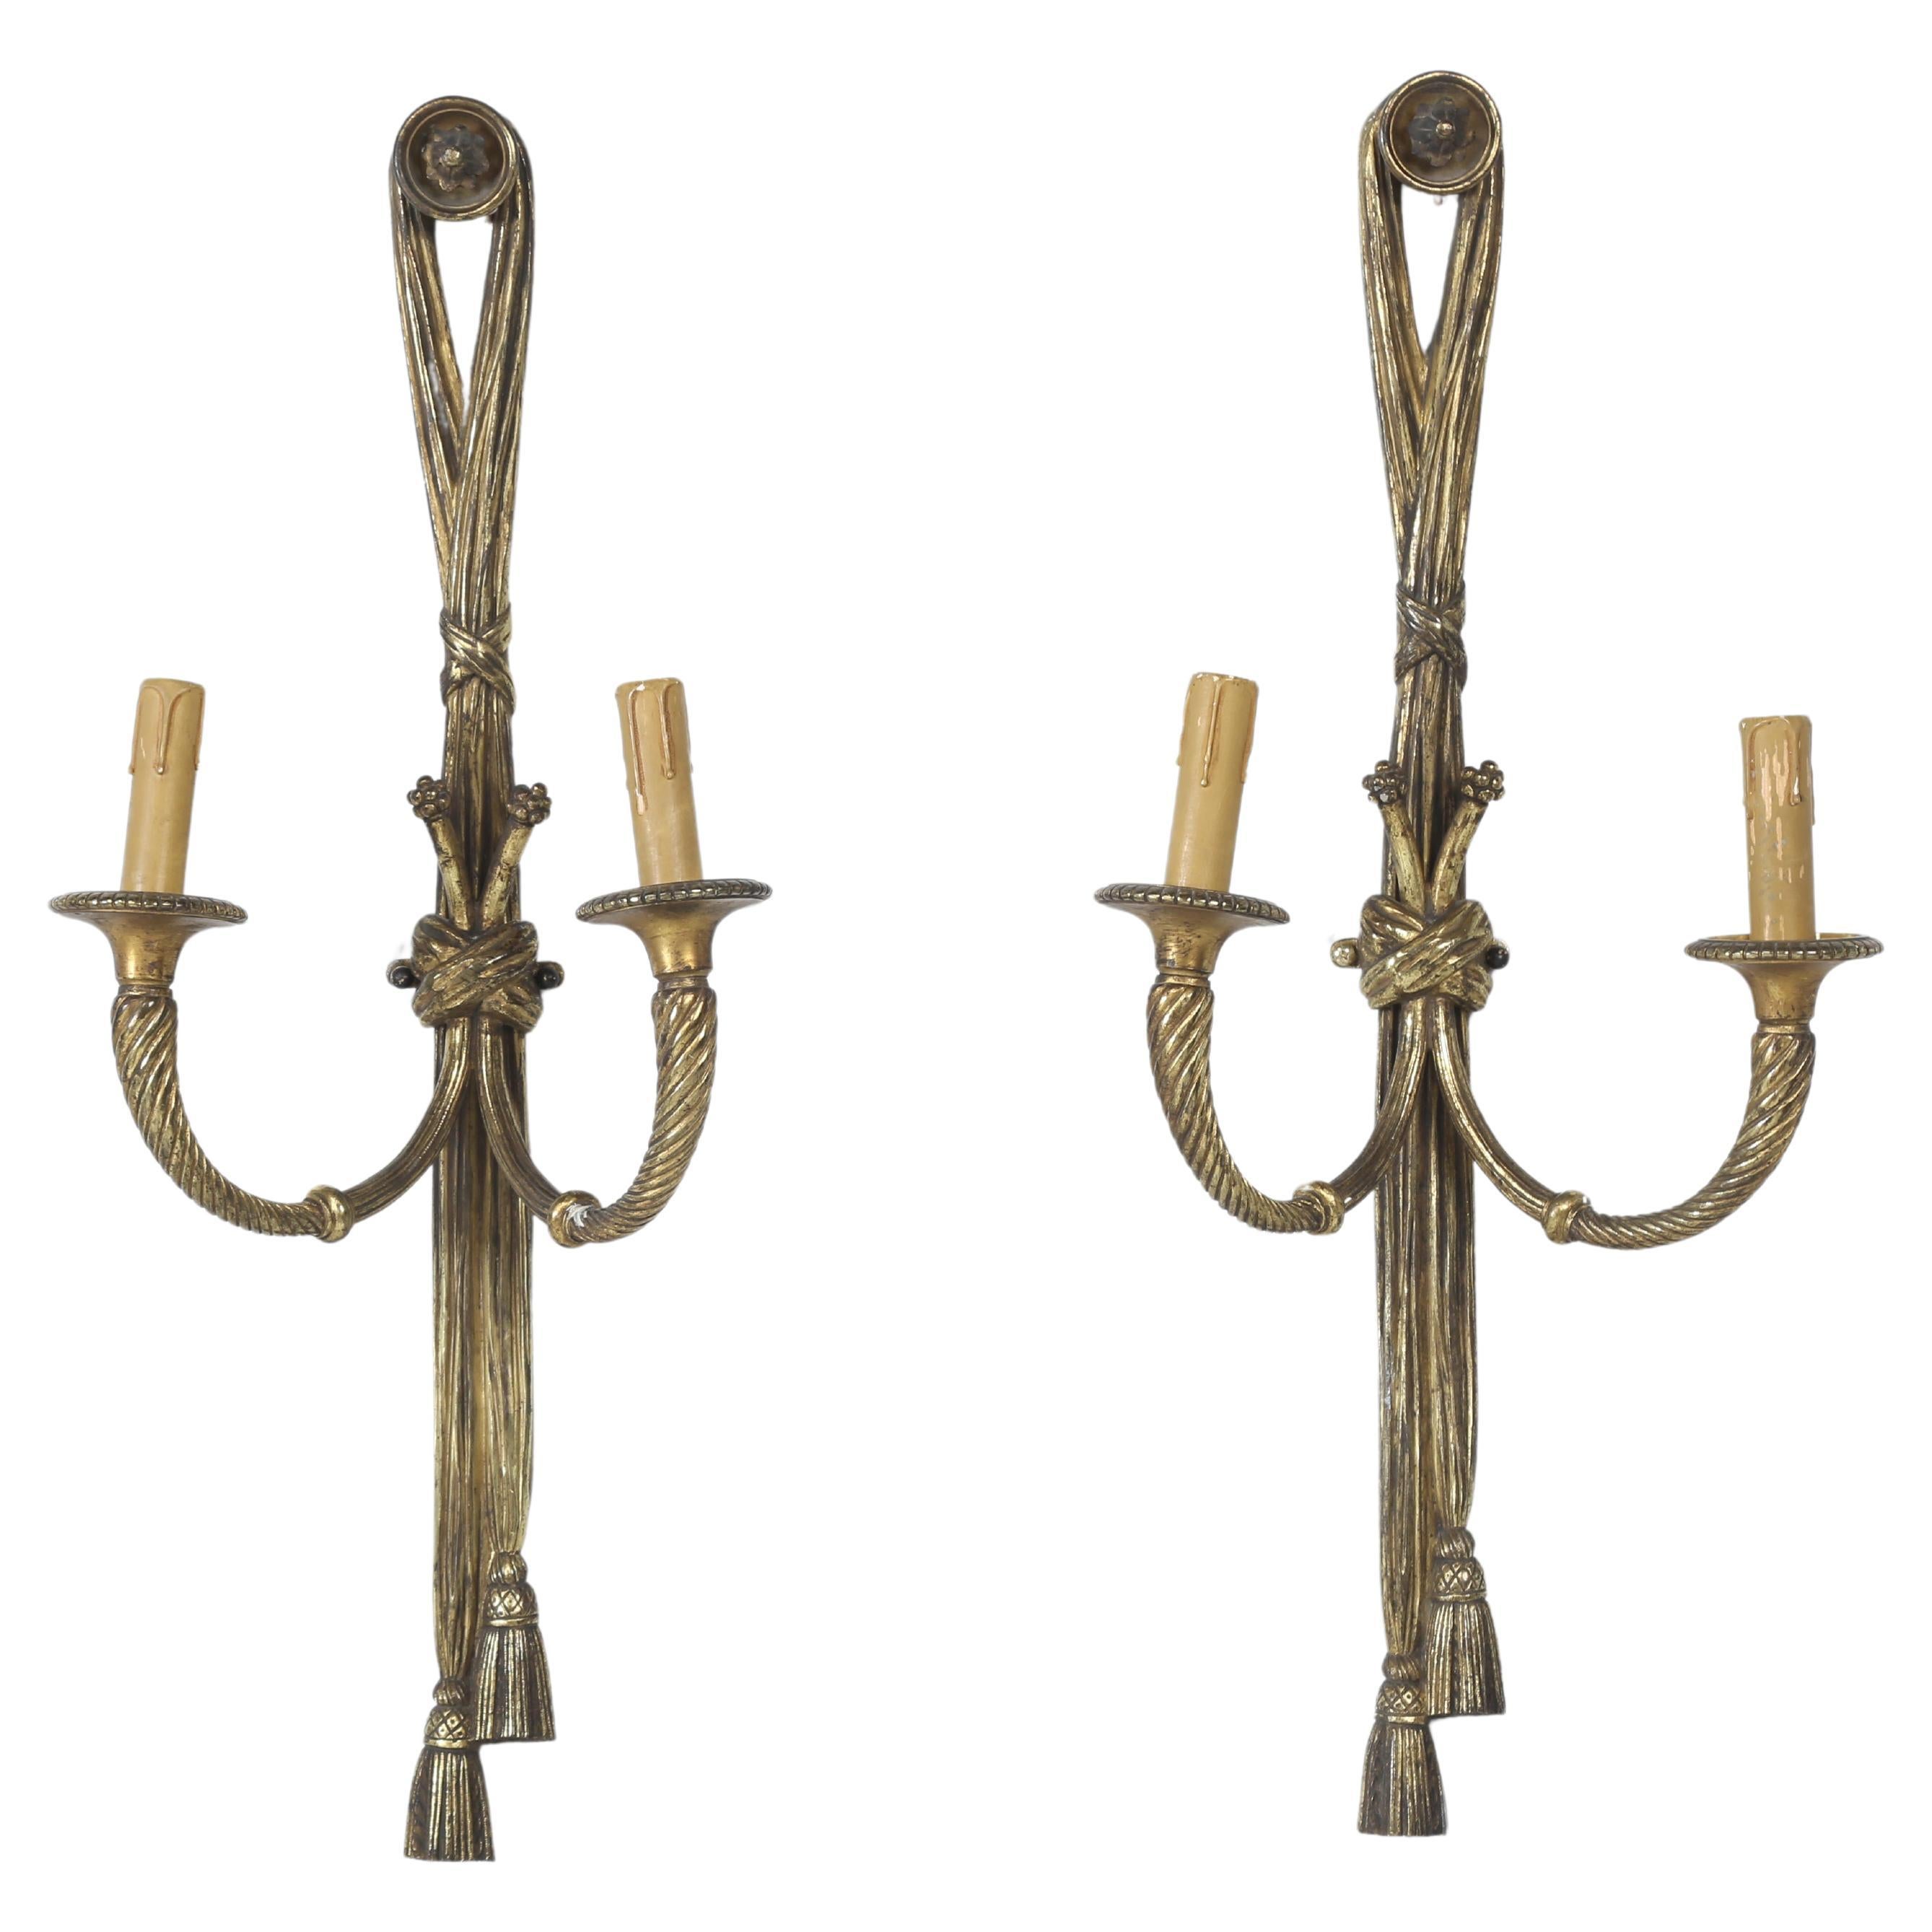 Exceptionally Fine Pair of late 1800s Louis XVI style French Gilt Bronze Sconces For Sale